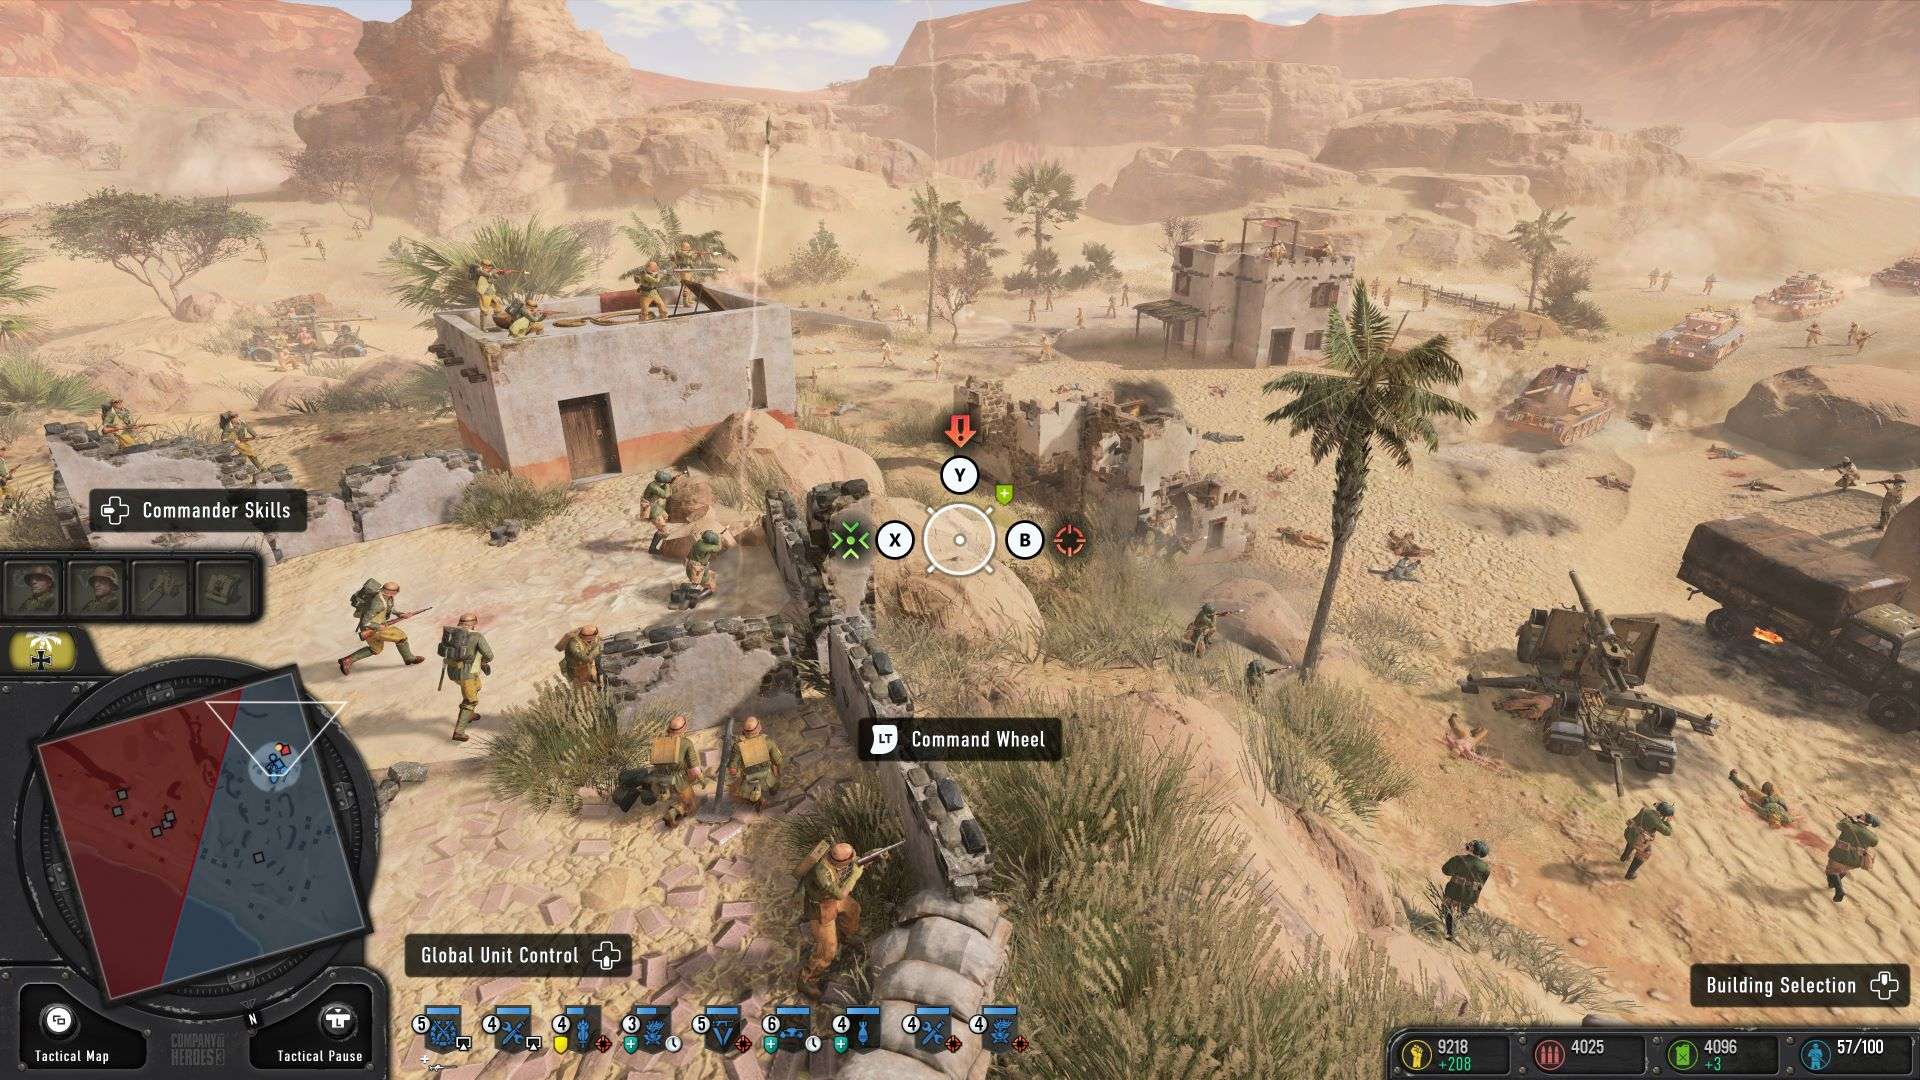 A Company of Heroes 3 screenshot showing the unit command wheel